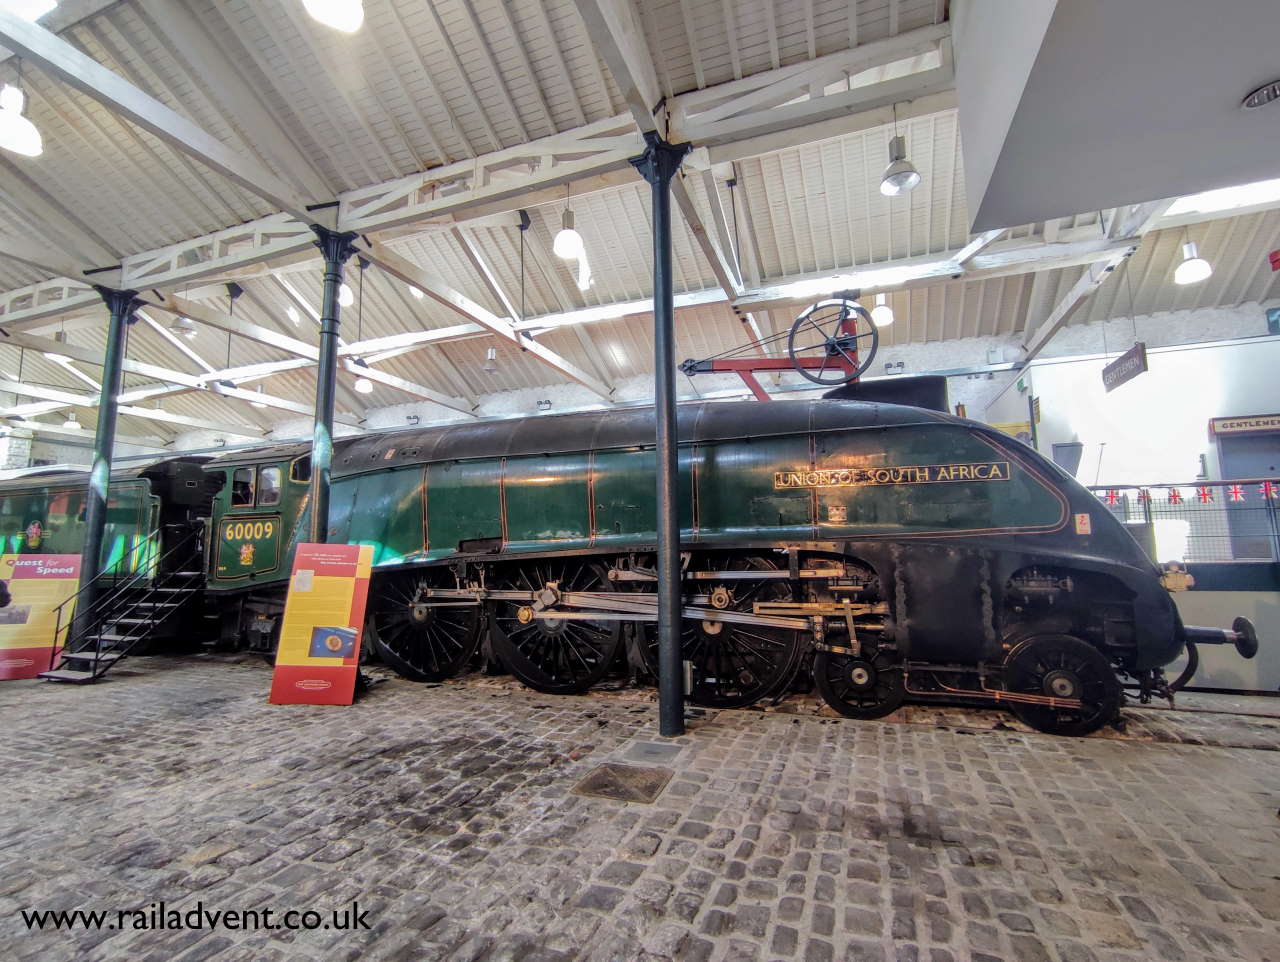 60009 Union of South Africa at the Bury Transport Musuem // Credit: RailAdvent 